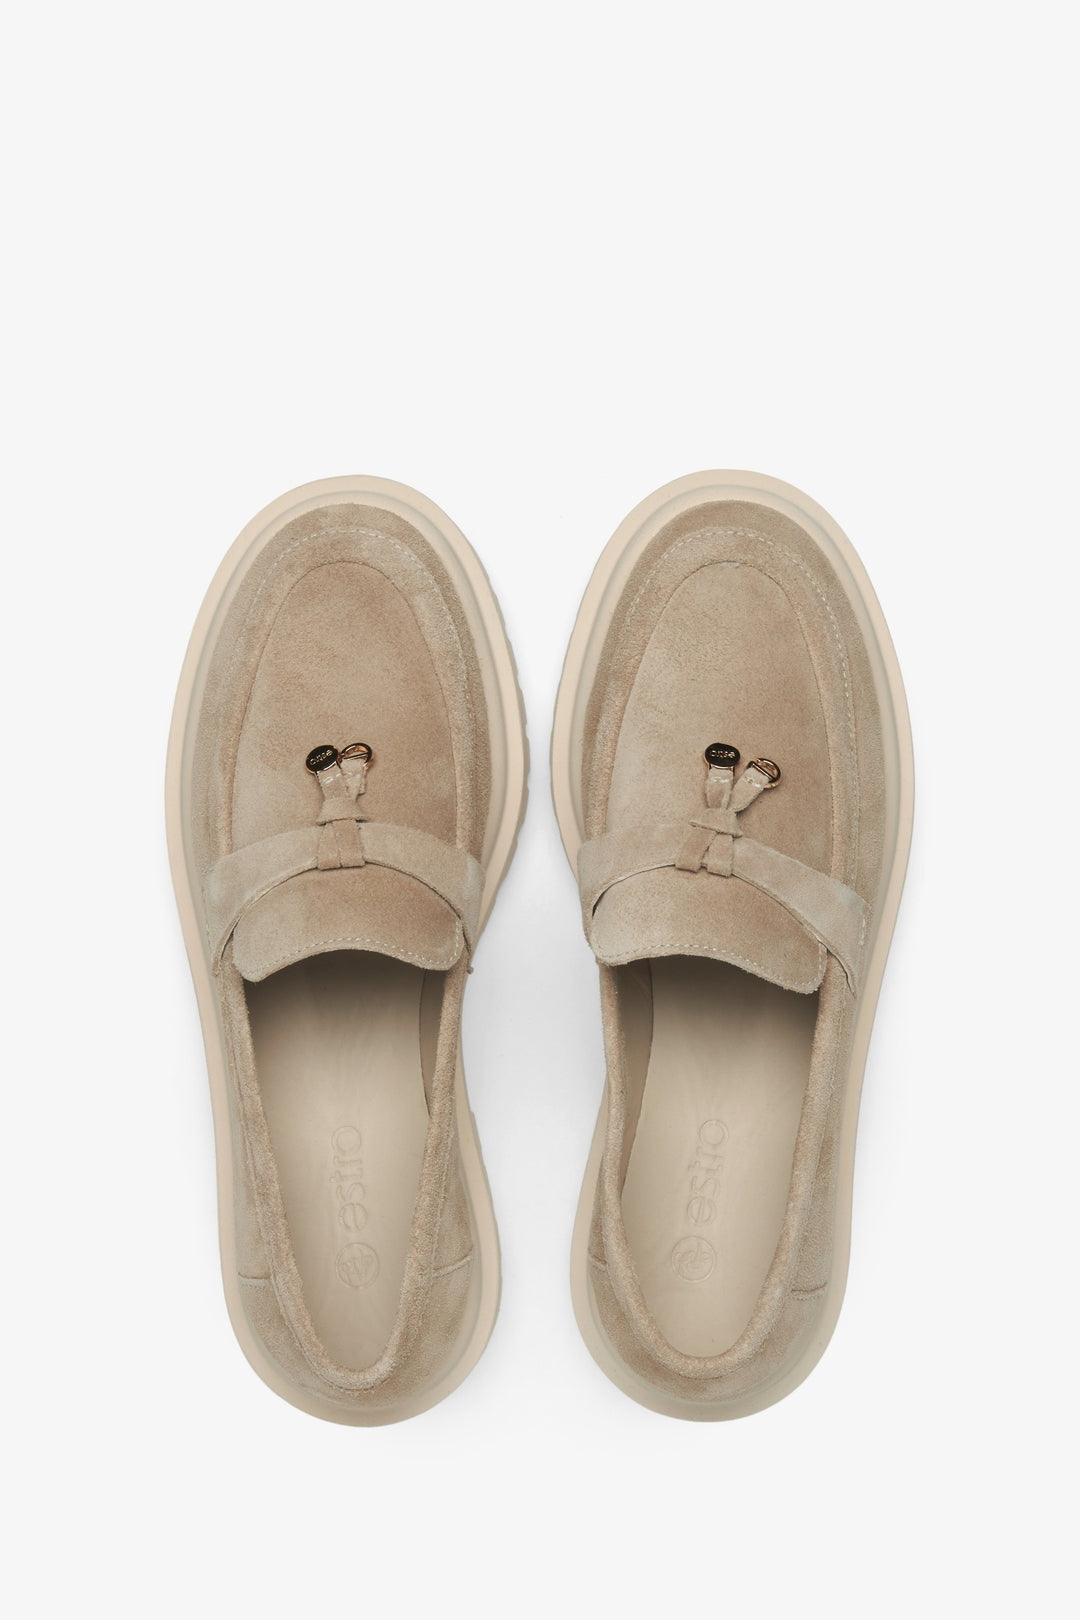 Light brown velour women's moccasins by Estro - top view presentation of the model.